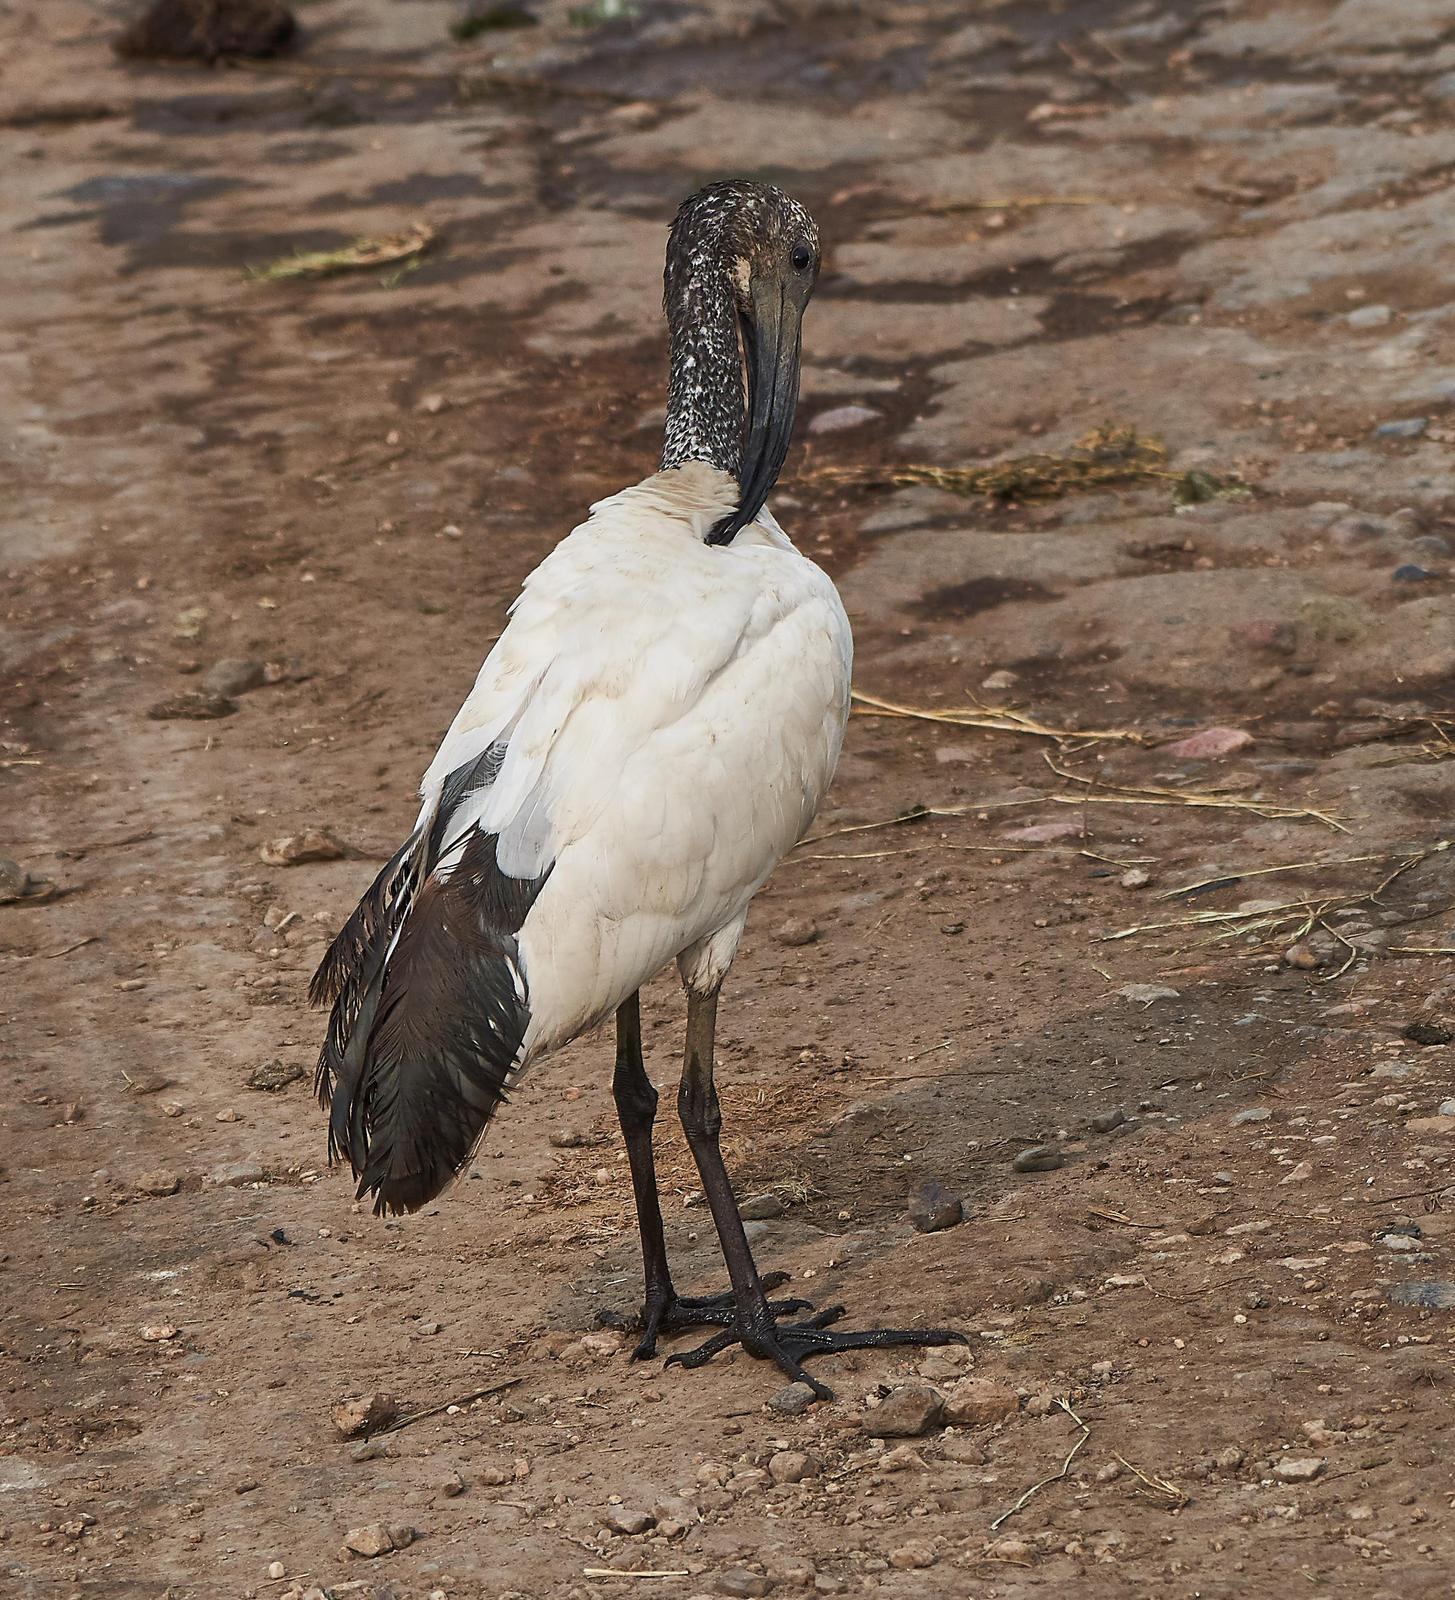 African/Madagascar Sacred Ibis Photo by Steven Cheong